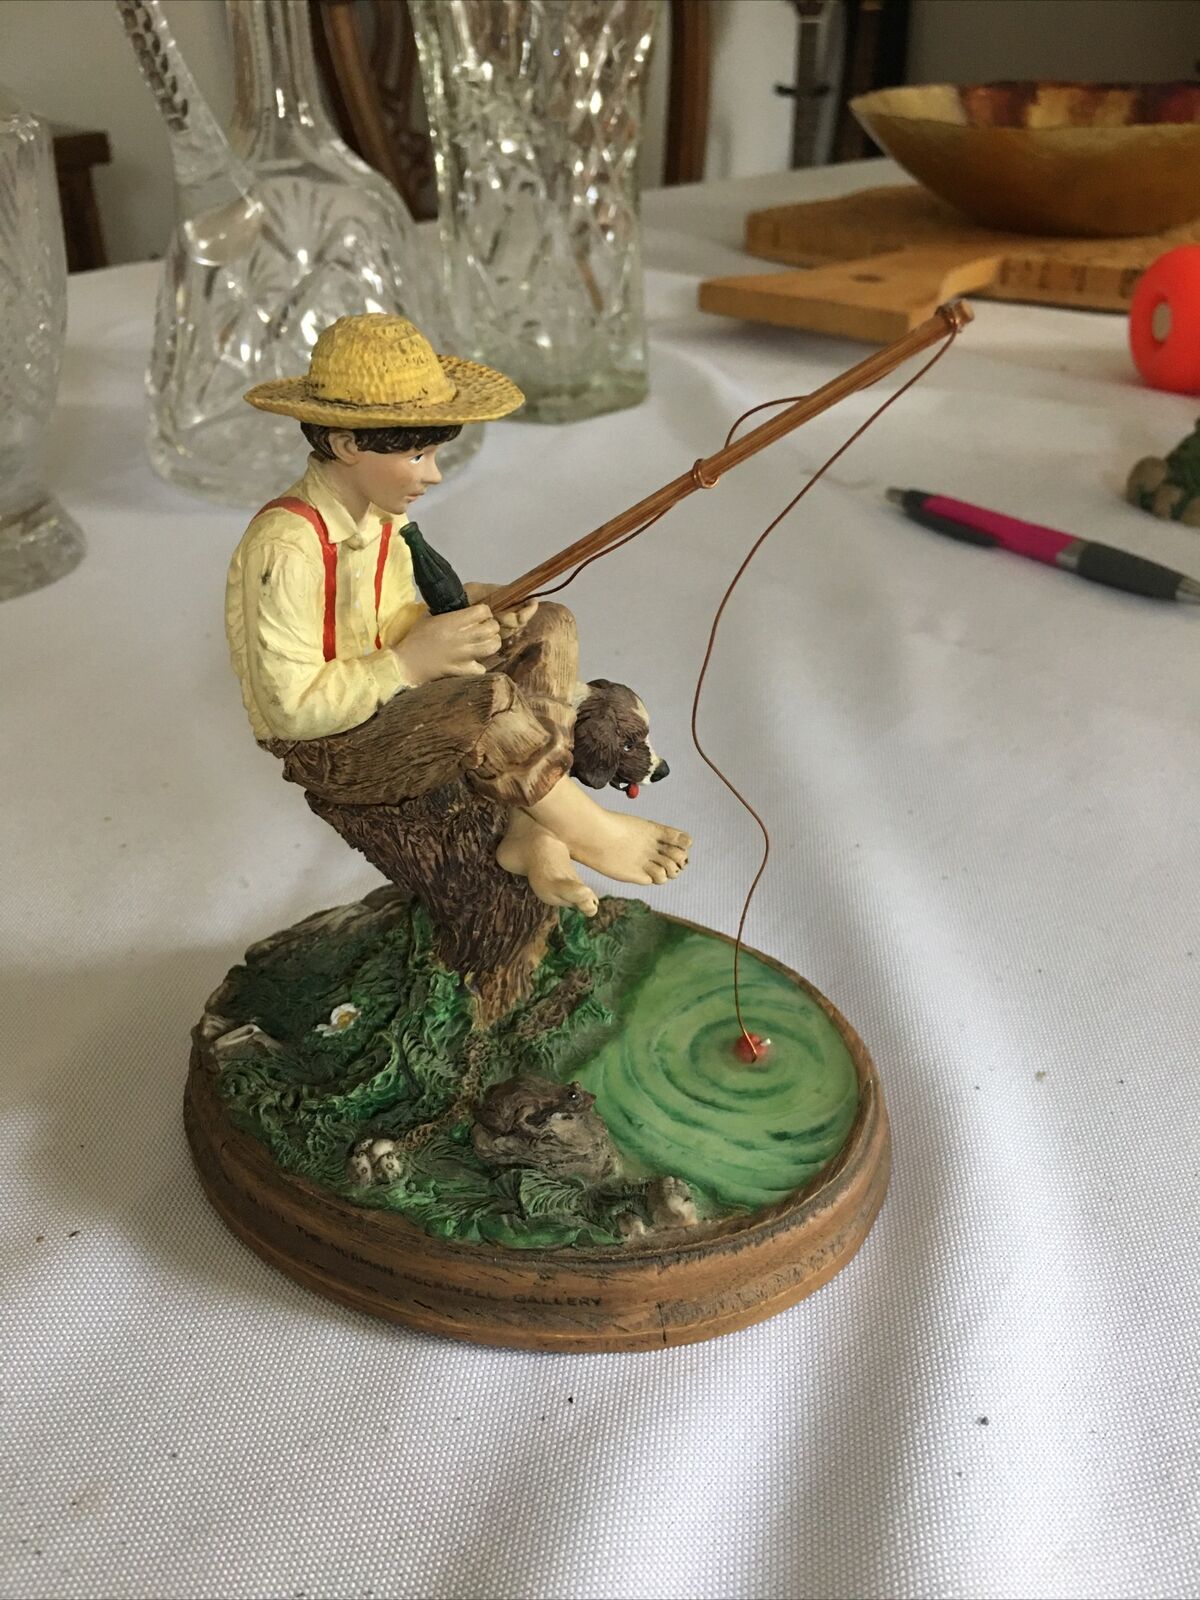 1991 Norman Rockwell BARK IF THEY BITE FIGURINE STAMPED NO. 141917